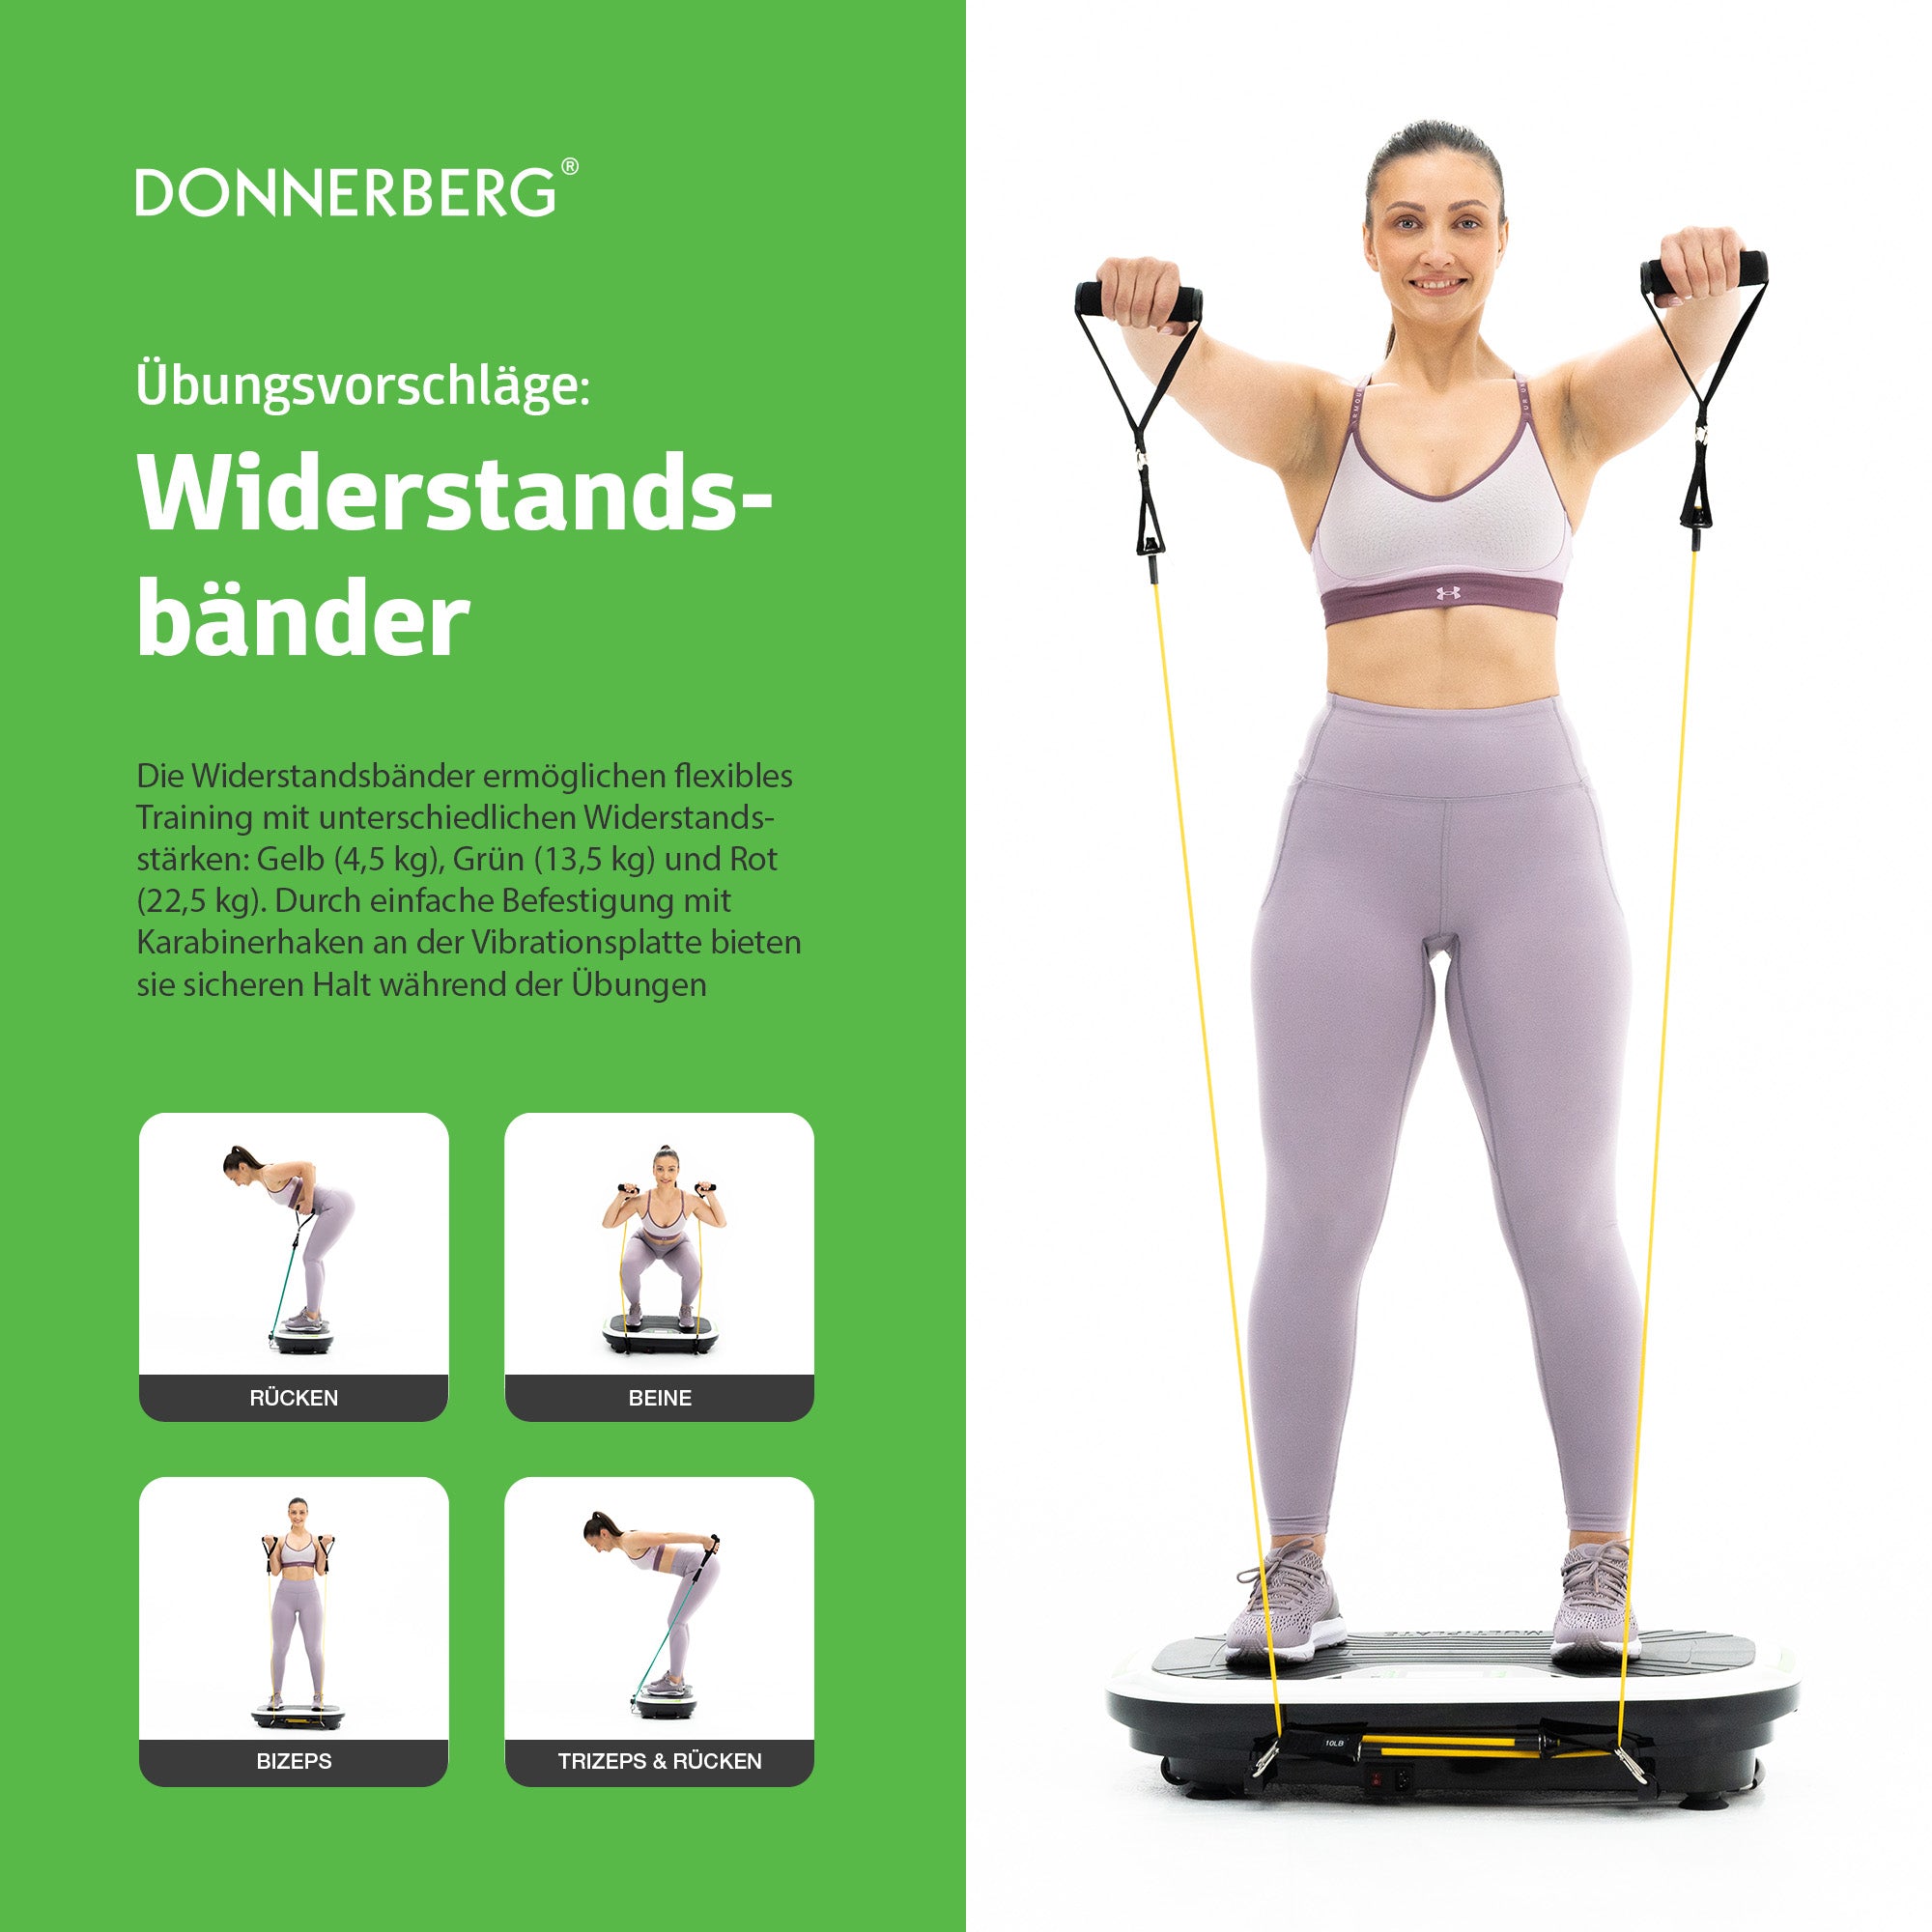 Examples of exercises with resistance bands on the vibrating machine